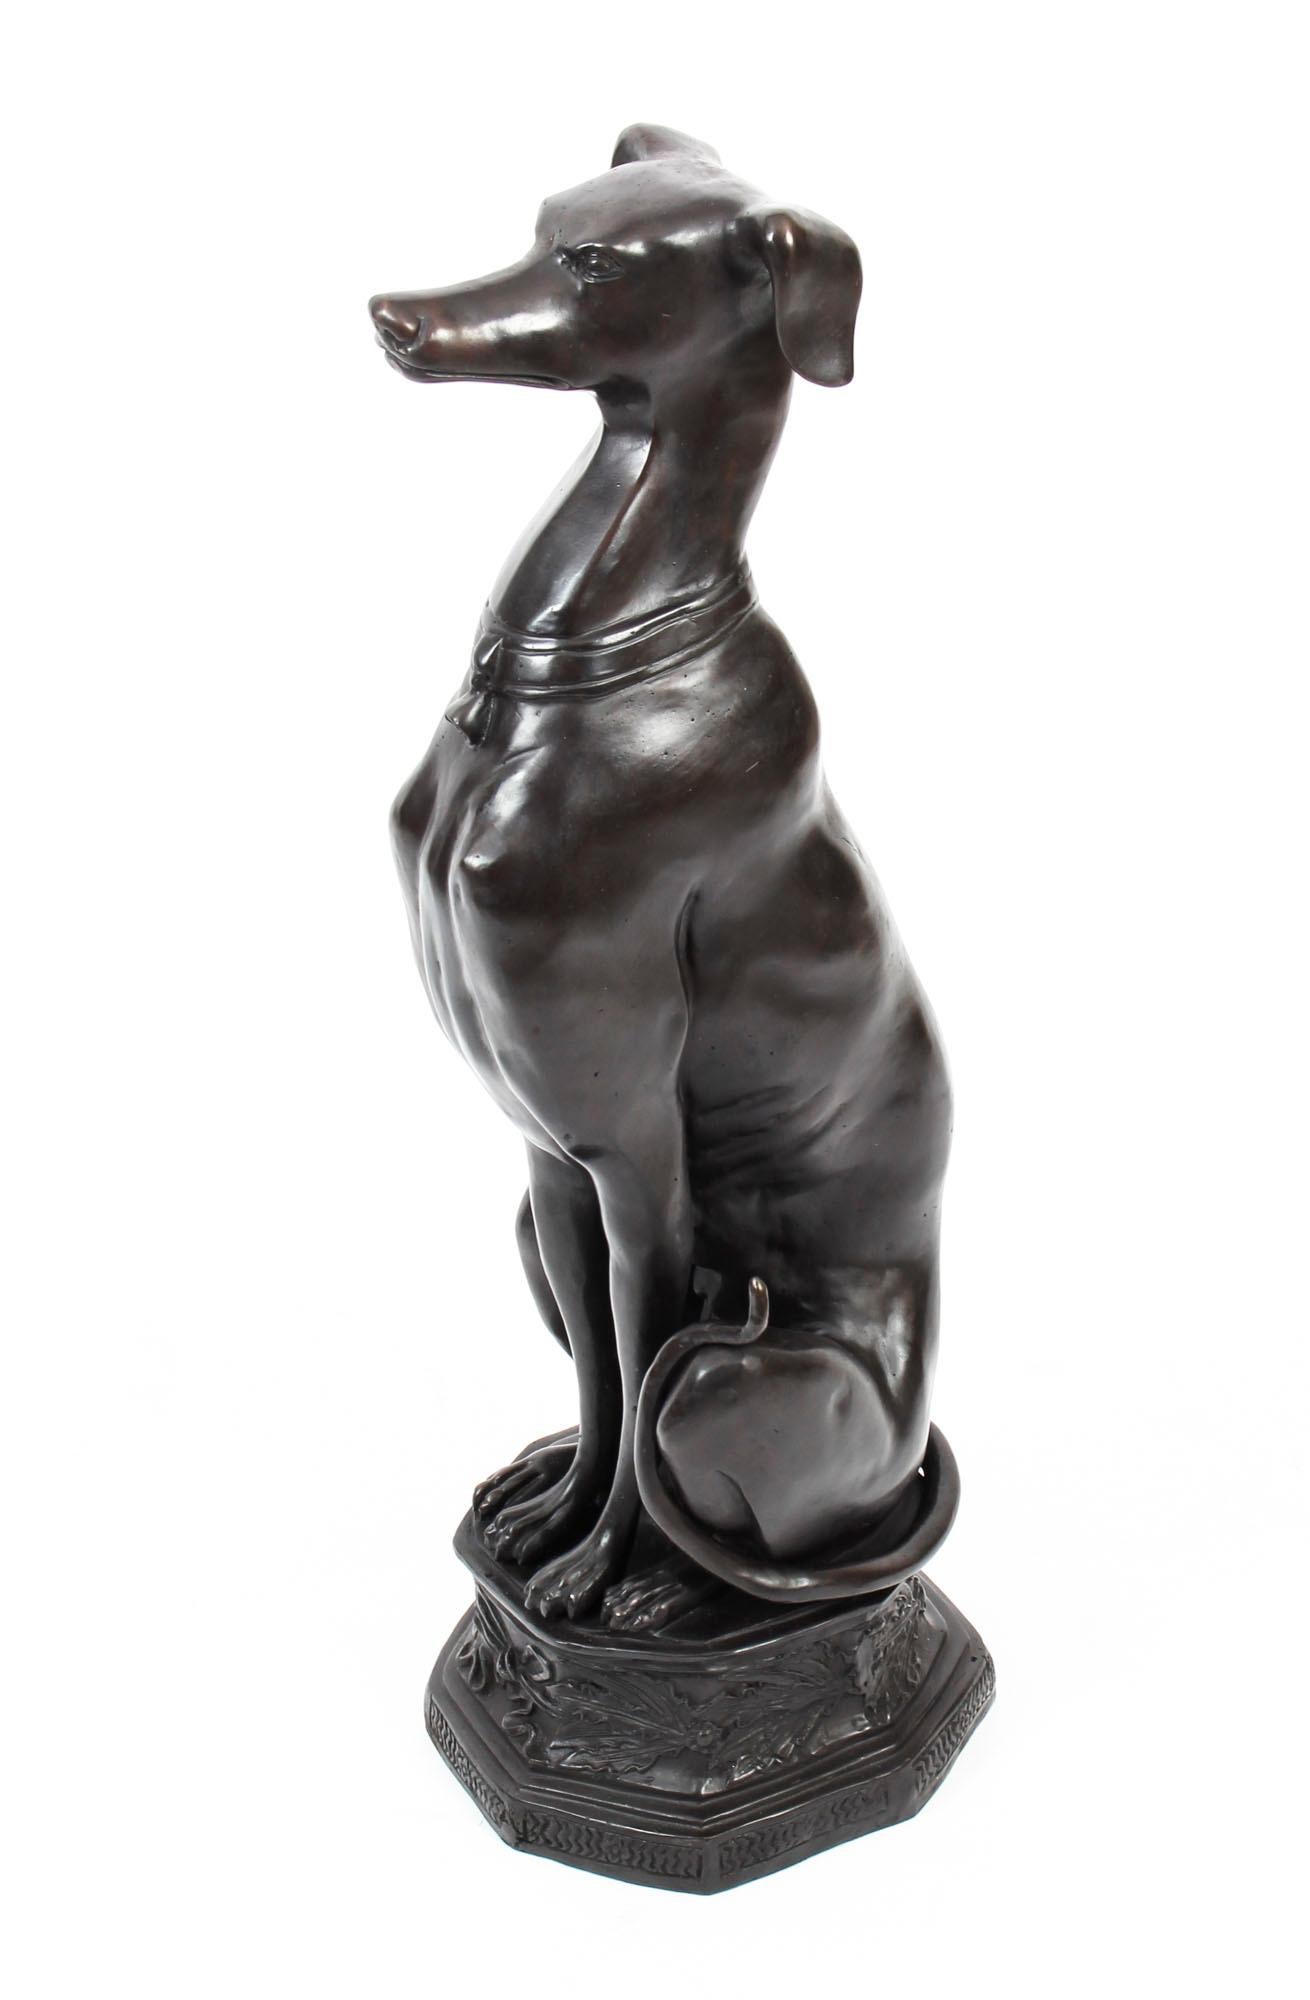 This is an impressive pair of dogs in the timeless Art Deco style, sitting attentively and awaiting the command of their master and dating from the mid 20th Century.

This high quality hot cast solid bronze was produced using the traditional 'lost